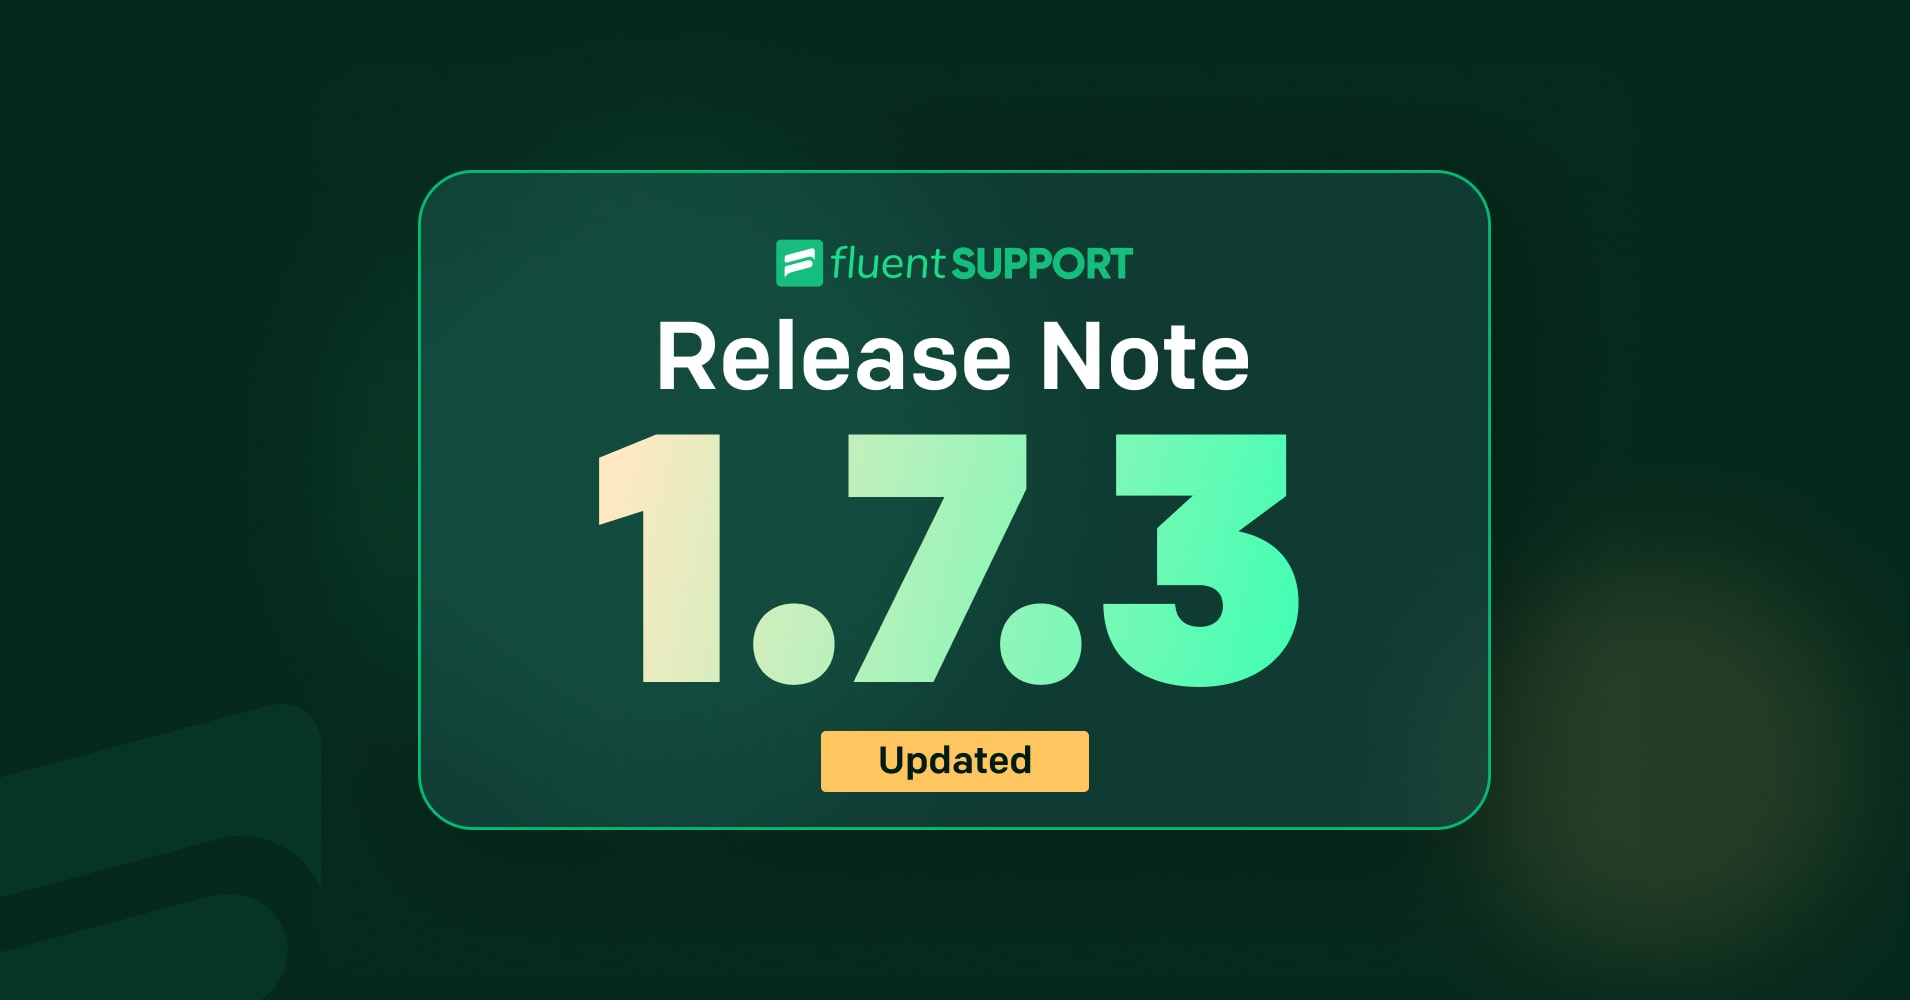 fluent support release note 1.7.3